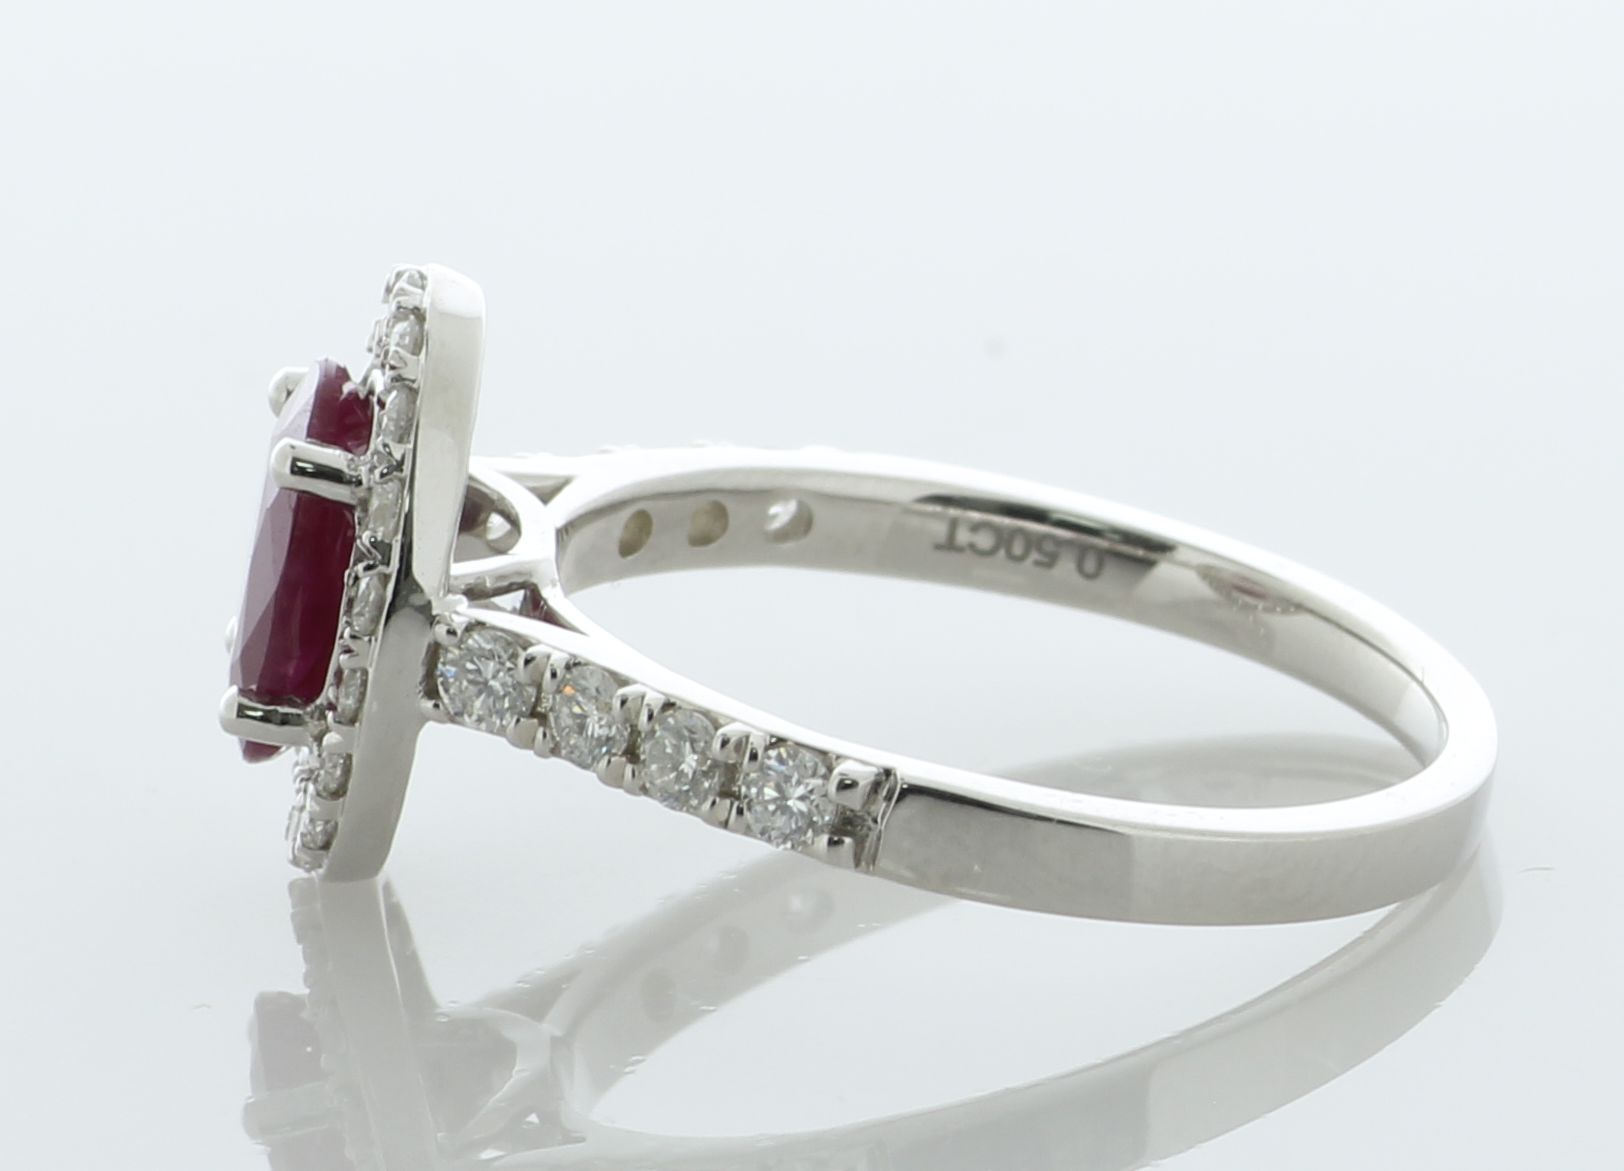 18ct White Gold Ladies Cluster Diamond And Ruby Ring (R2.00) 0.65 Carats - Valued By AGI £6,950.00 - - Image 3 of 5